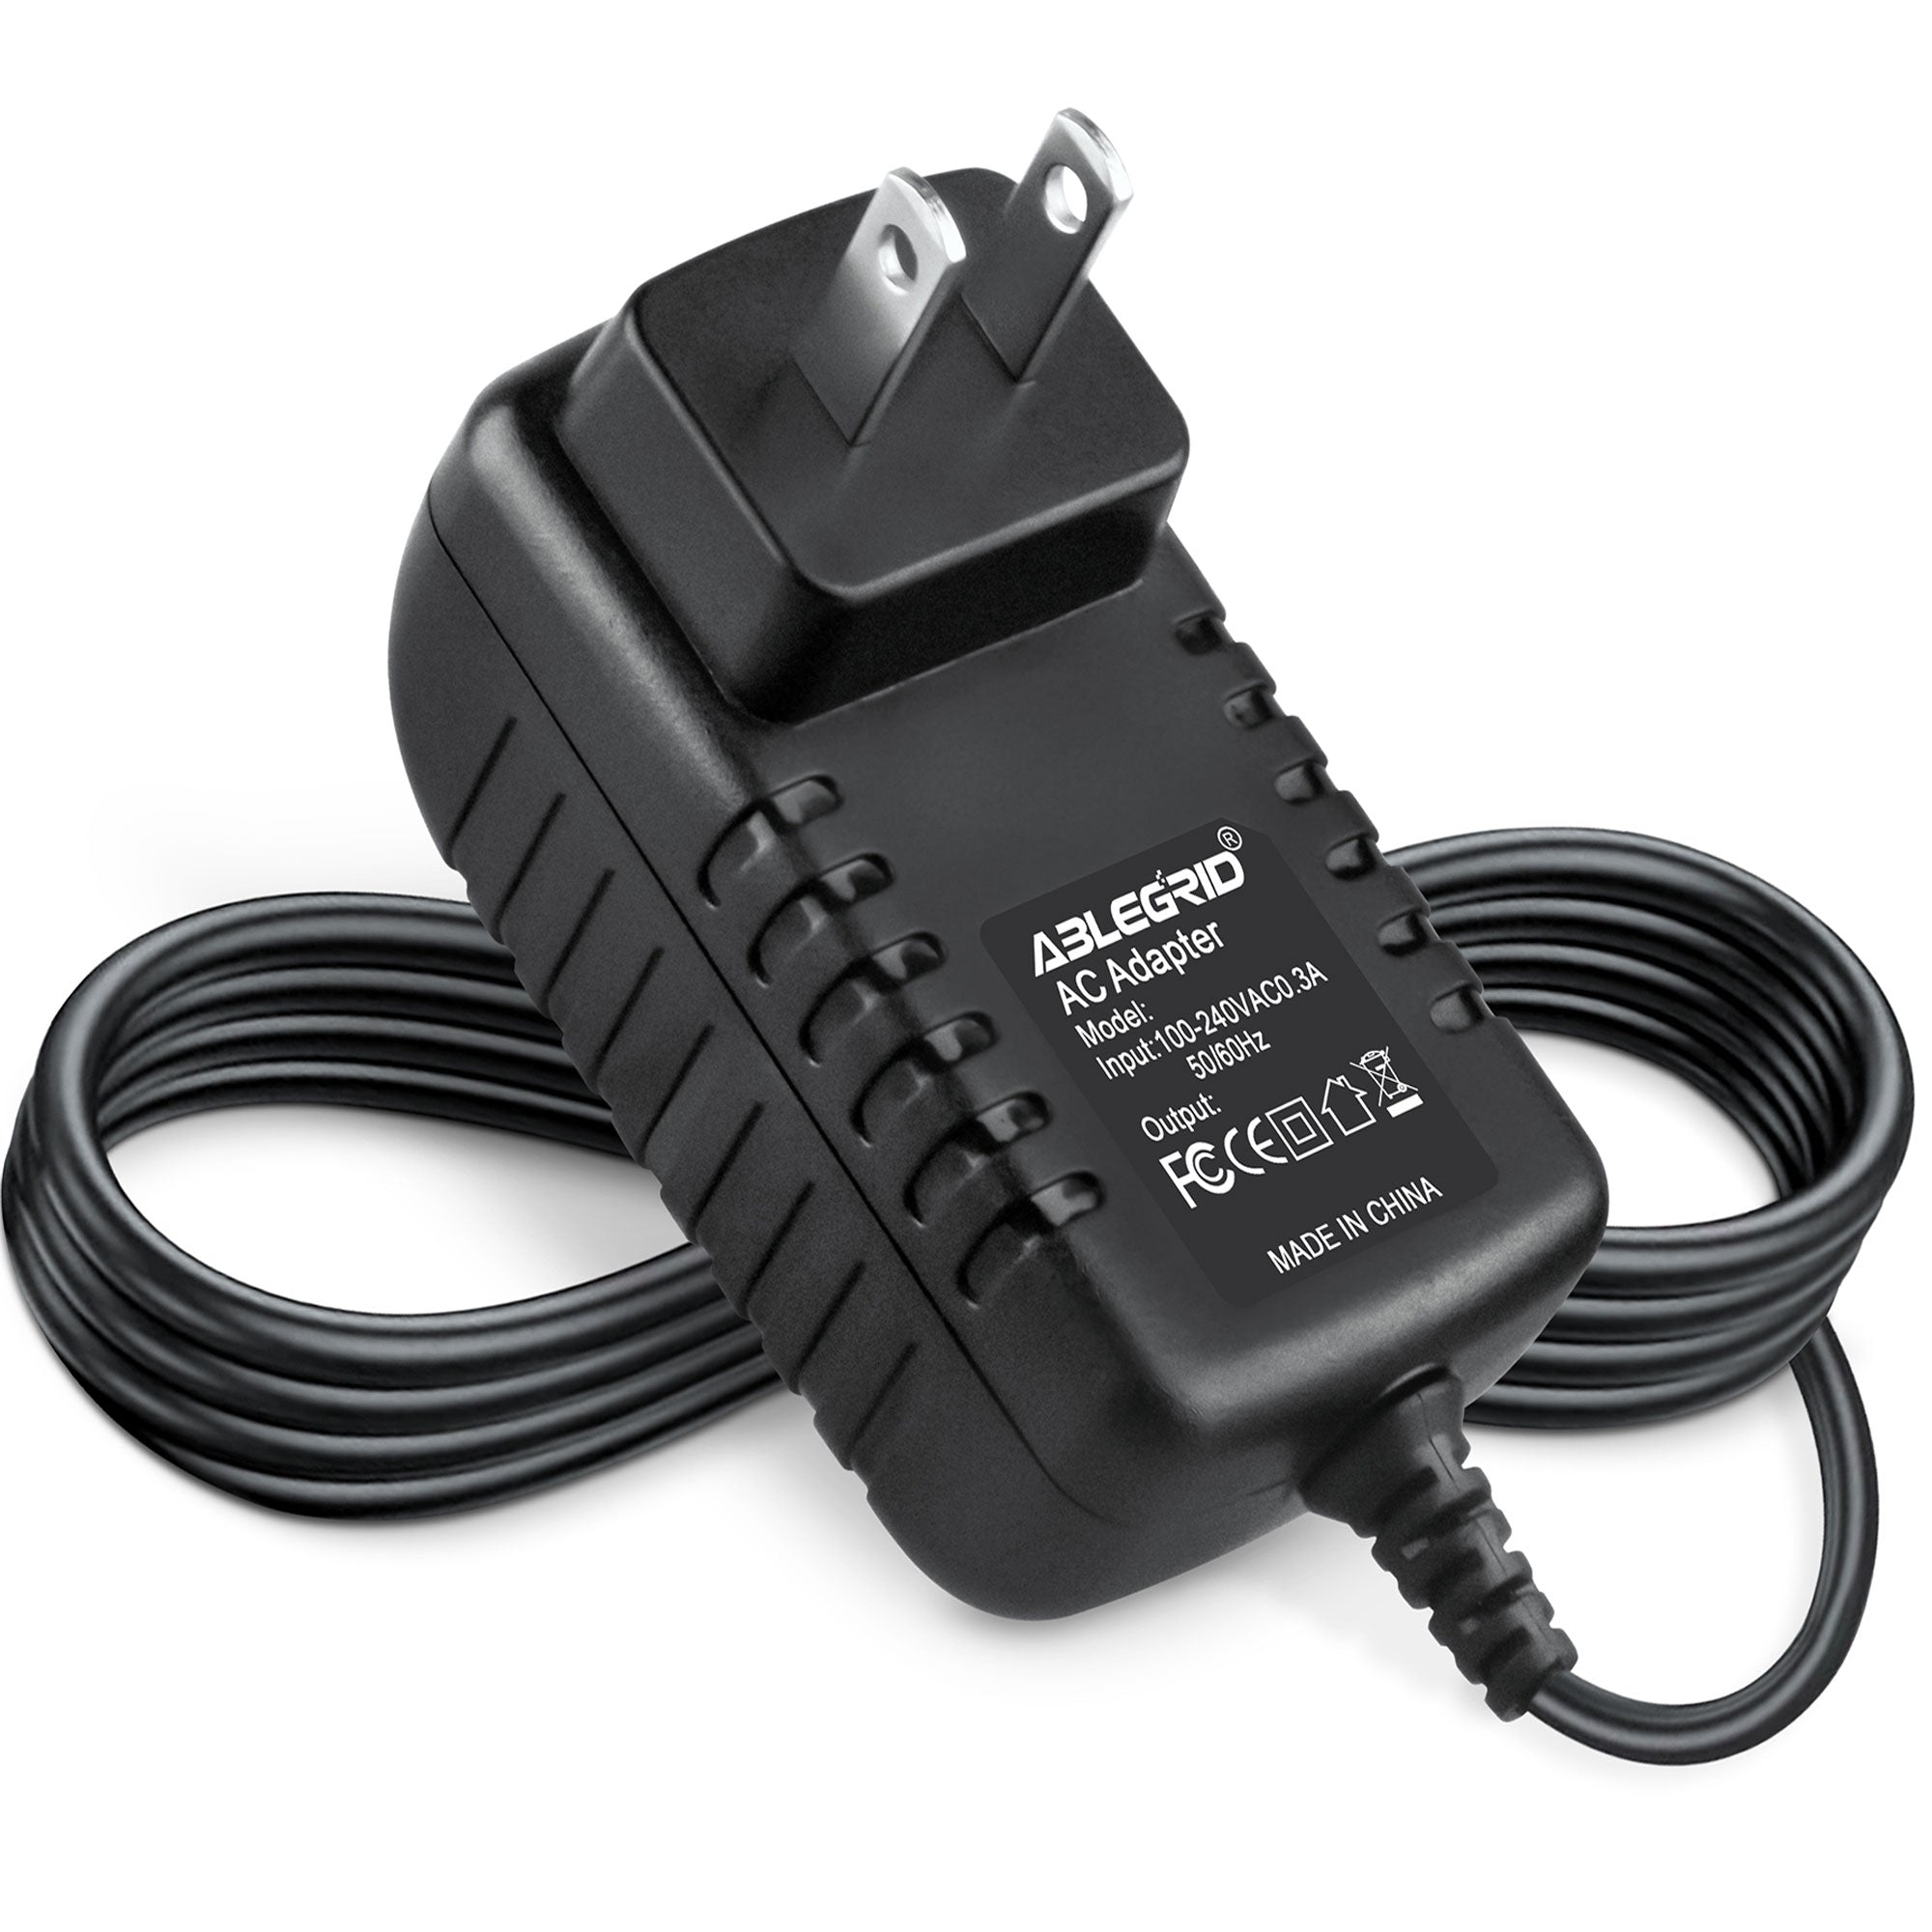 AbleGrid AC-DC Adapter for Roland PK-7 SPD-S VT-1 UA-5/100/101/700 UM-550 UA700 Power Supply Cord Cable PS Wall Home Charger Input: 100 - 240 VAC 50/60Hz Worldwide Voltage Use Mains PSU